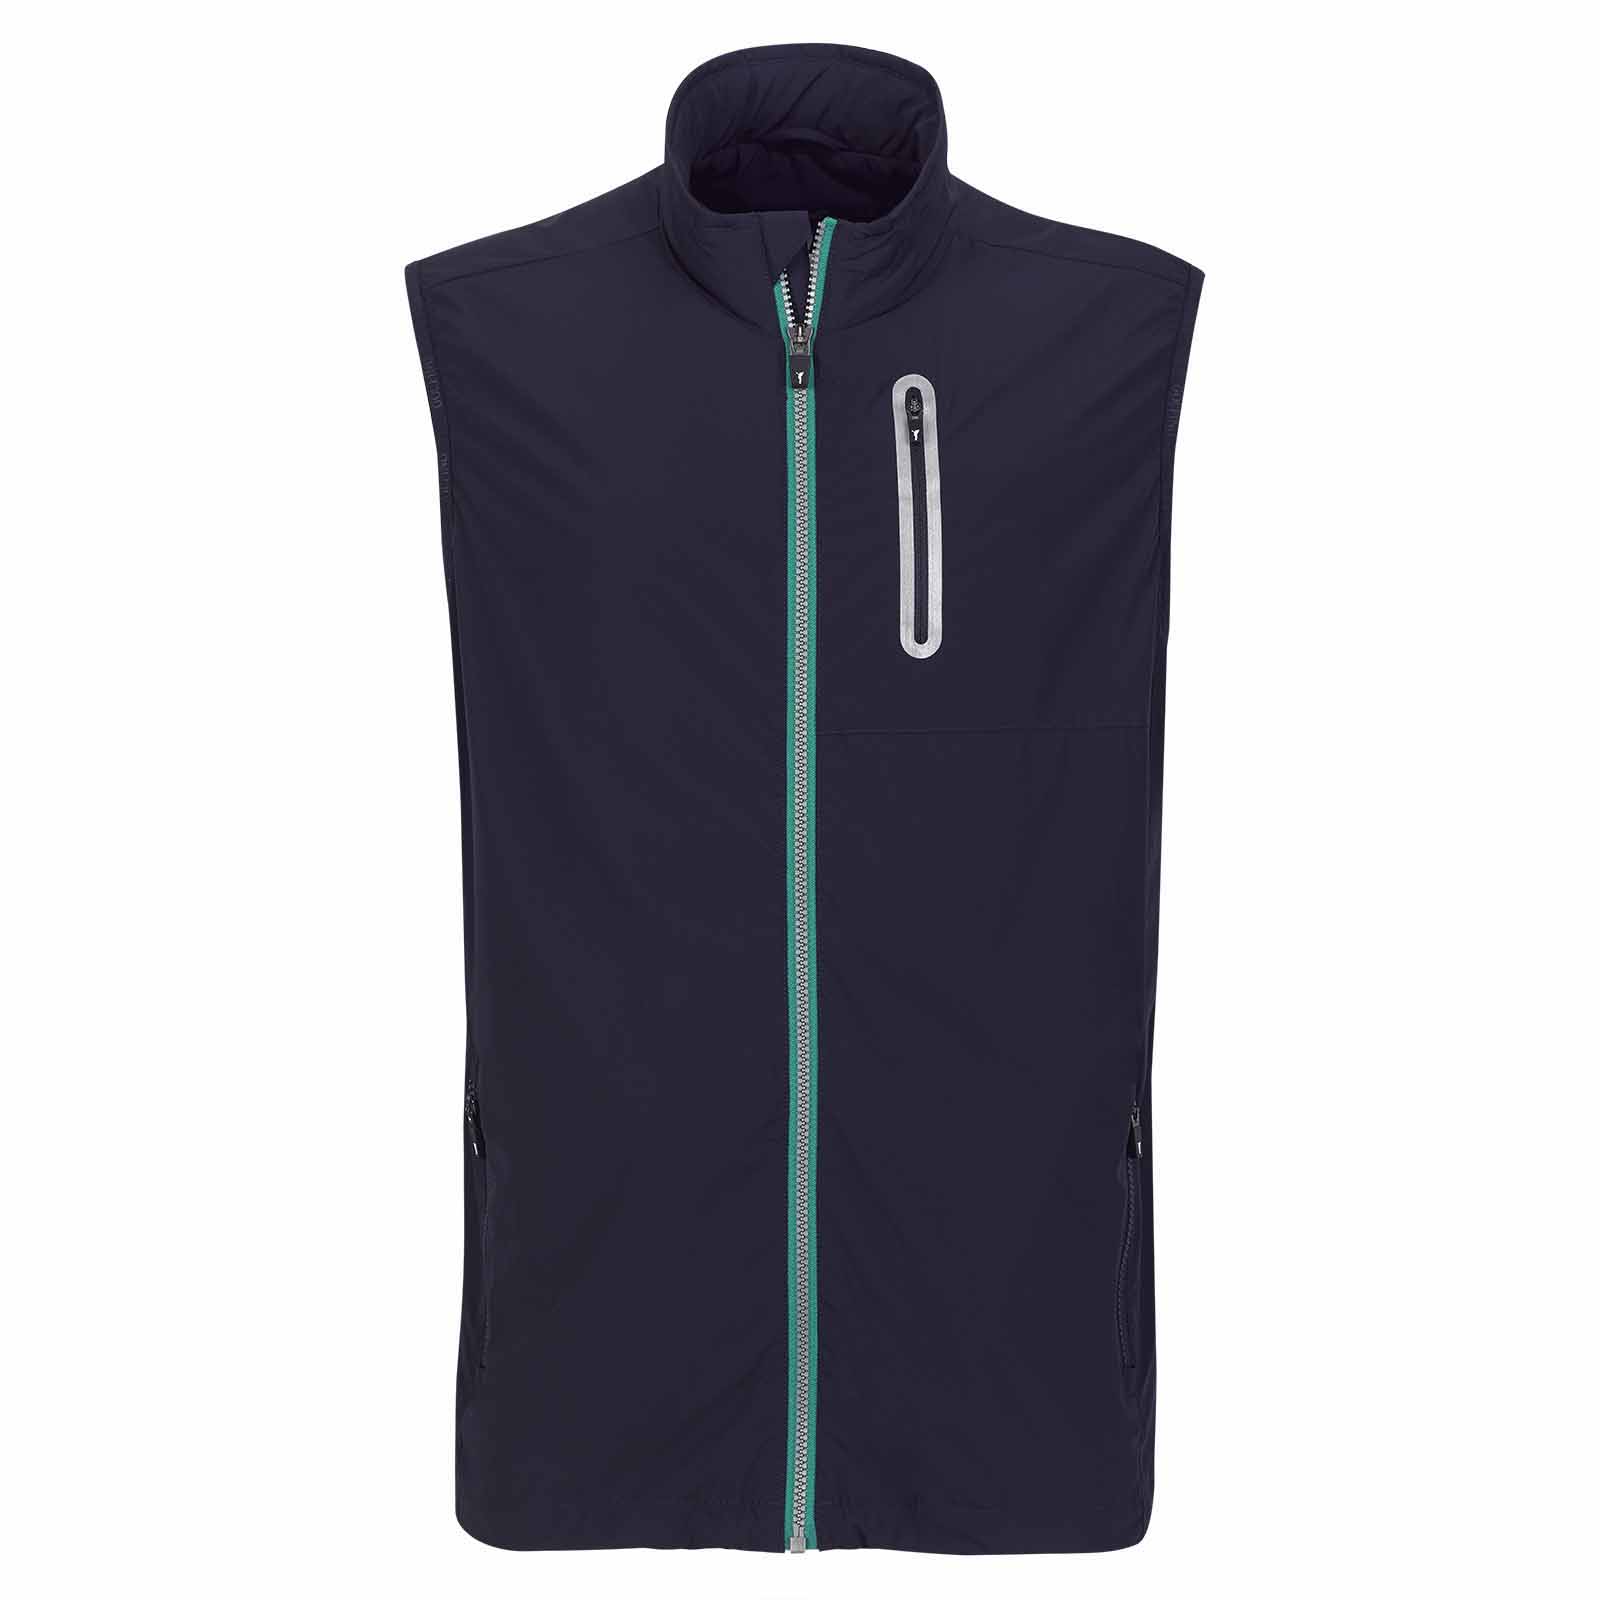 Men's golfing gilet with extra stretch comfort in pro- look